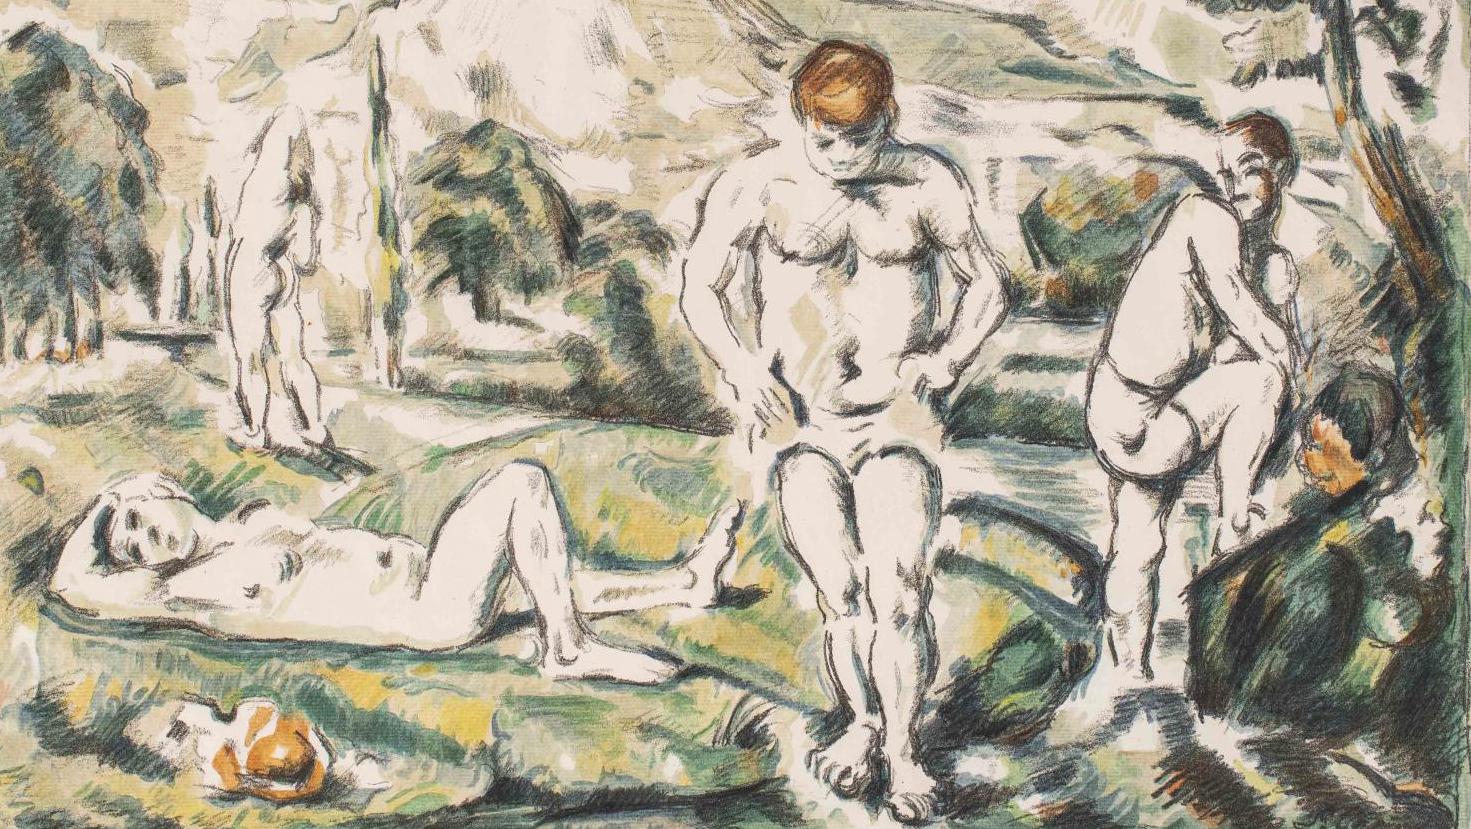 Paul Cézanne (1839-1906), Les Baigneurs (grande planche) (The Bathers, Large Plate),... A Celebration of Engraving: Masters from Piranesi to Picasso